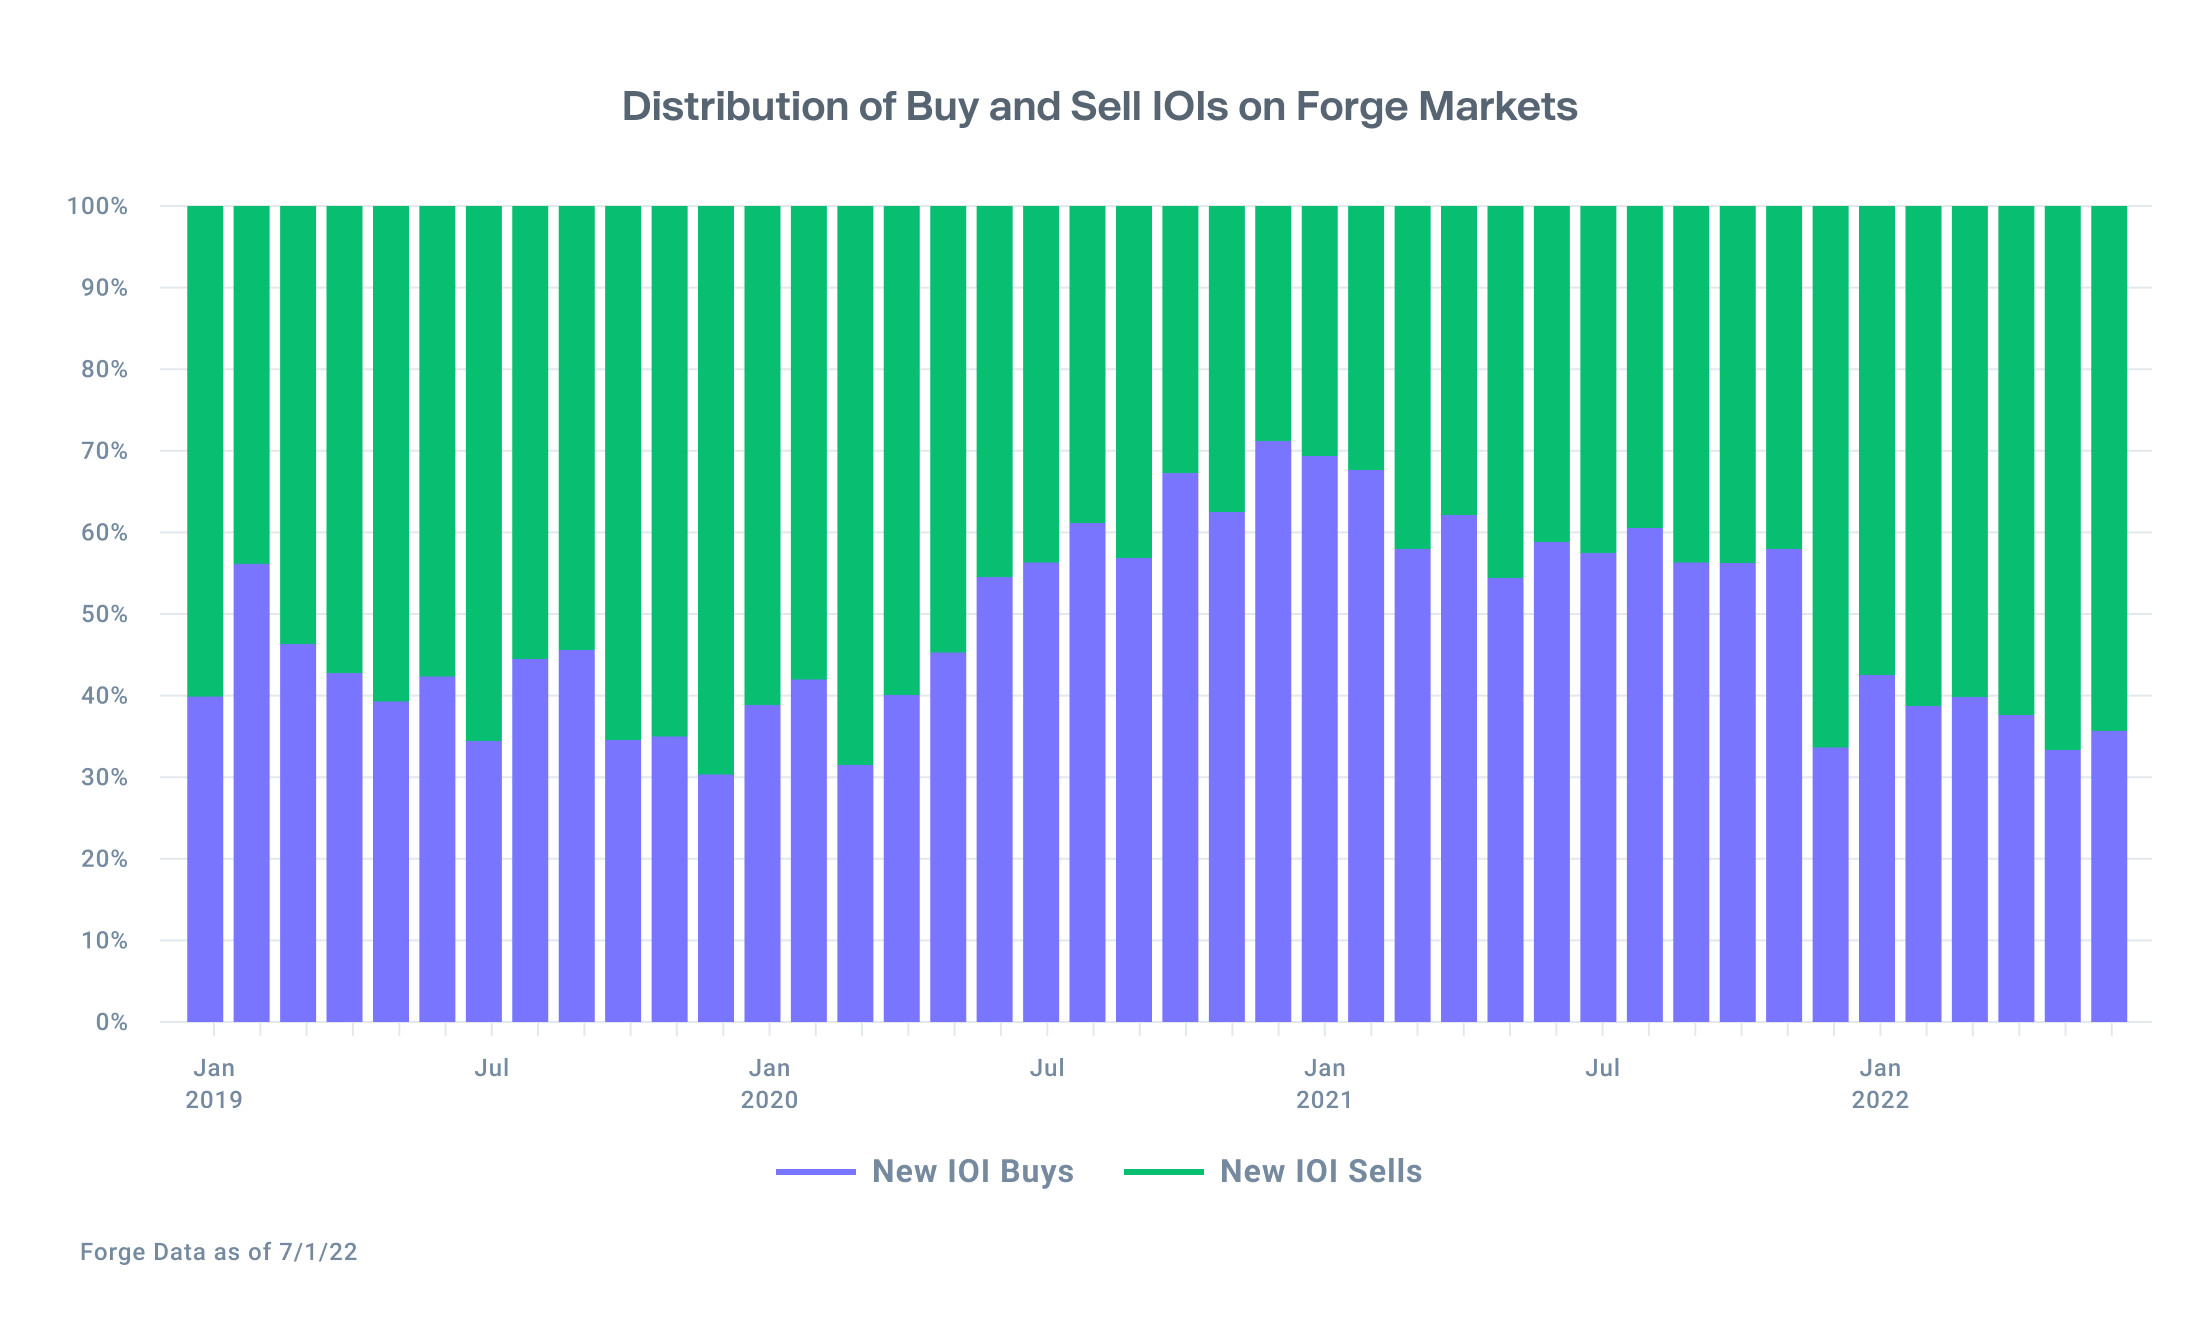 Graph showing the mix of buy and sell interest from Forge Markets with 65% of sell interest in May